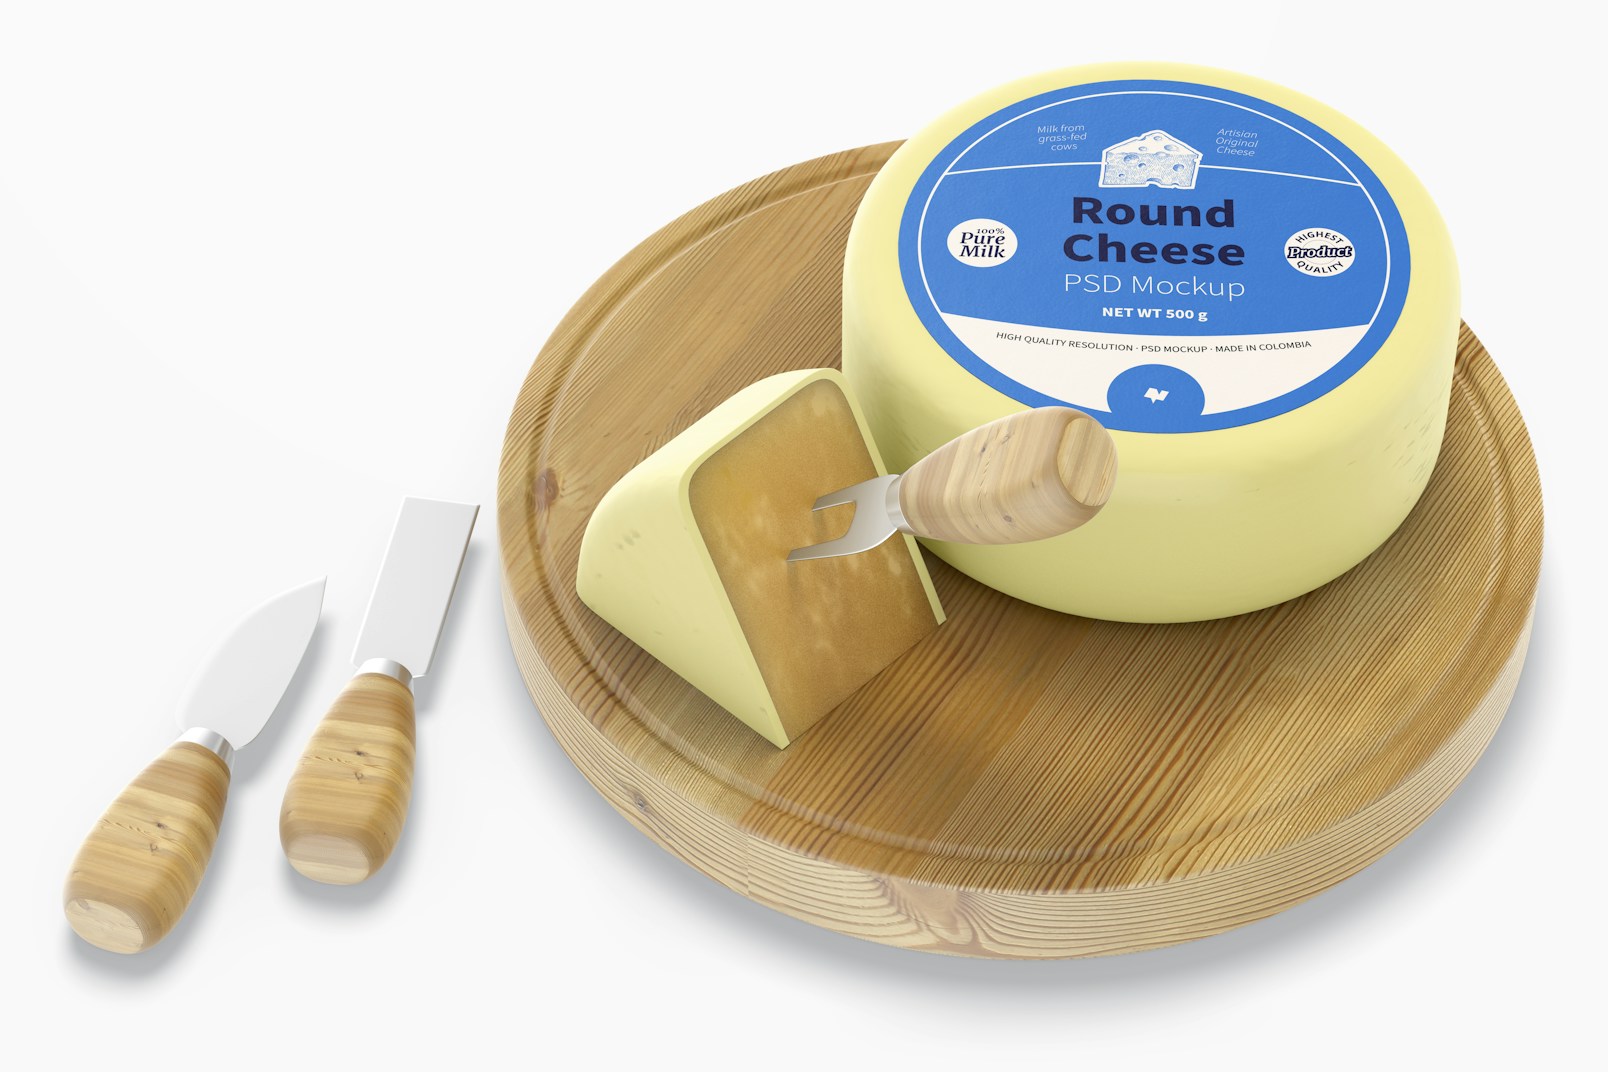 Round Cheese with Cheeseboard Mockup